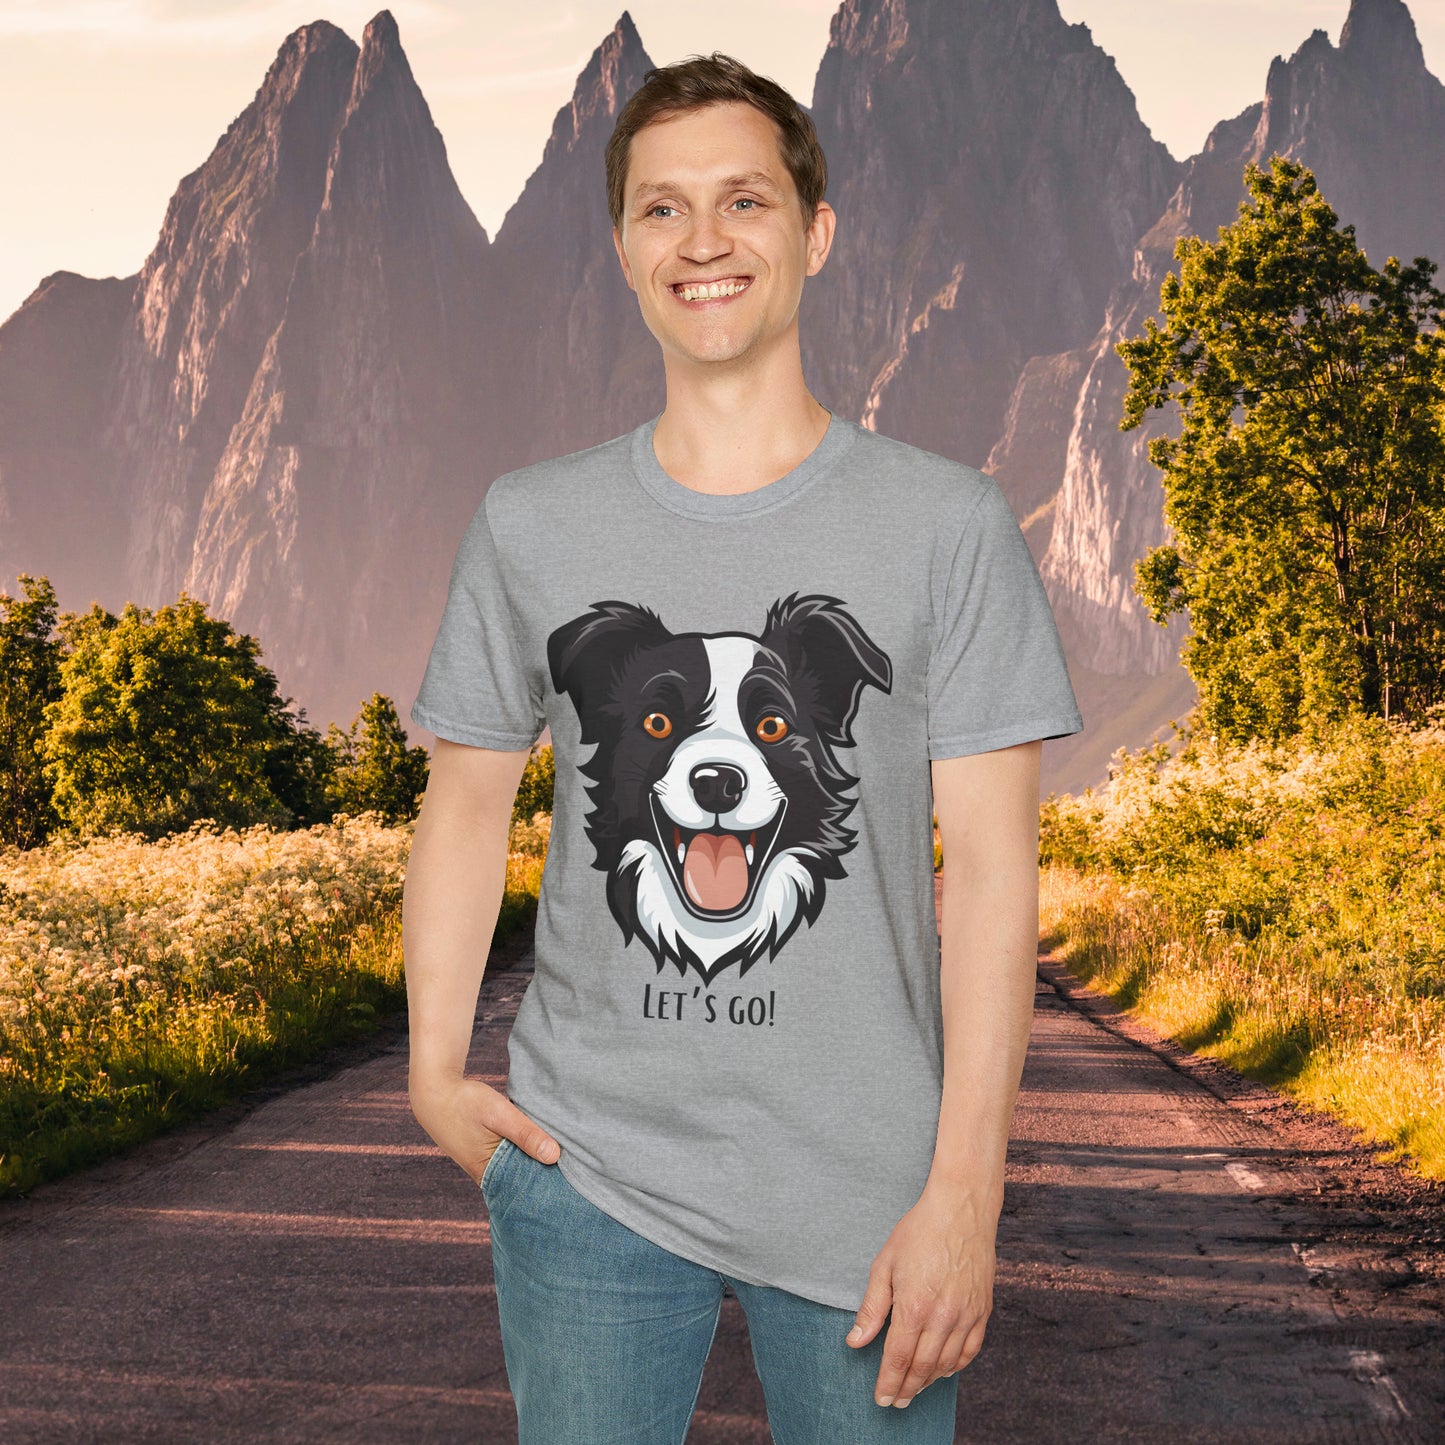 Dog lovers know that look of anticipation and excitement from their dog before a walk, hike or anything fun! This is a Unisex Softstyle T-Shirt.